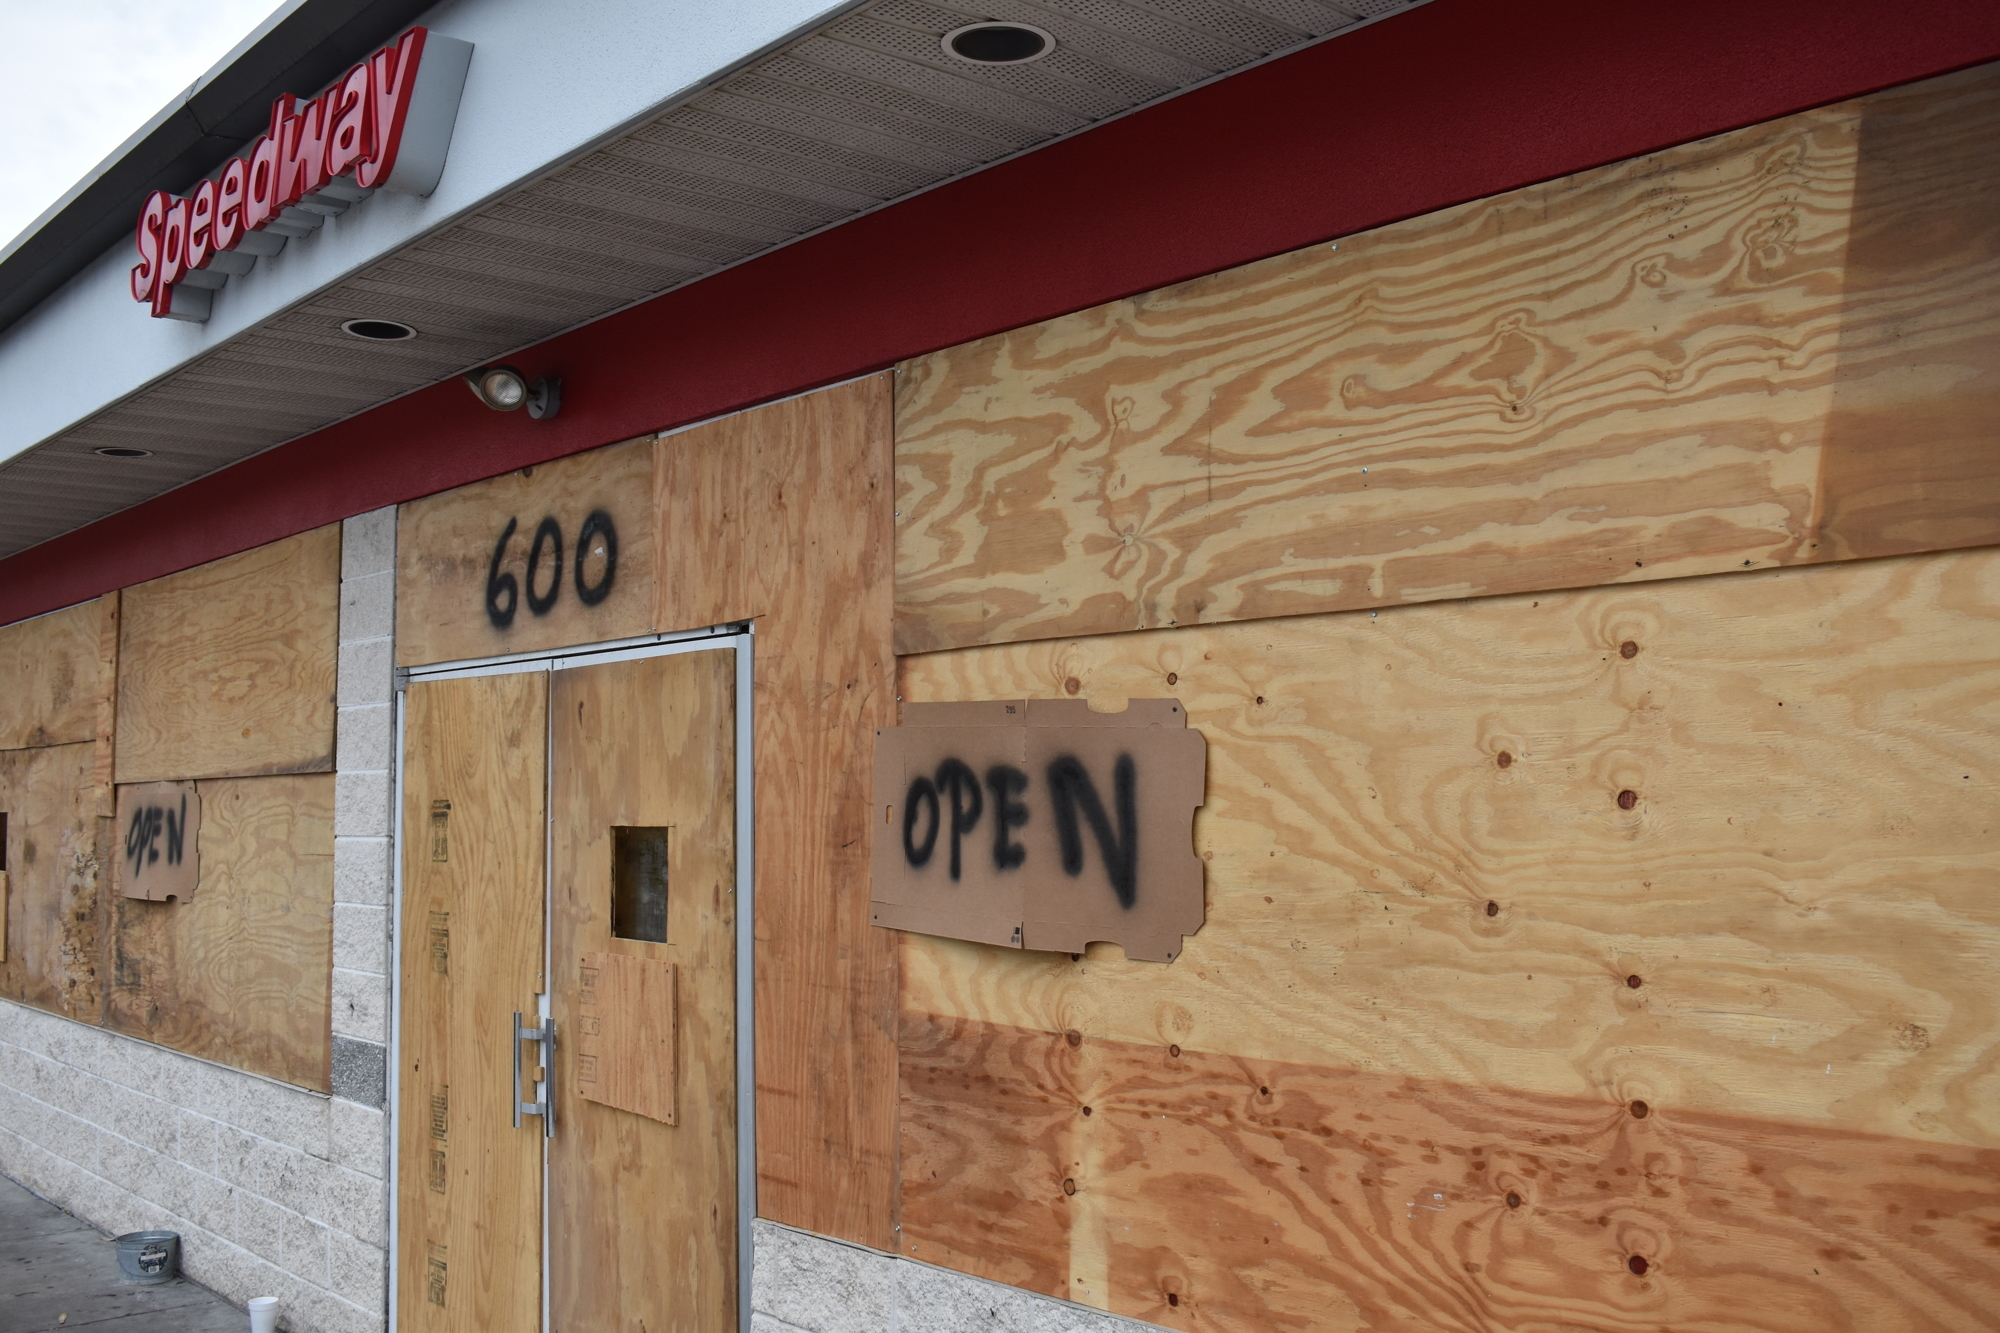 A convenience store on U.S. 301 near downtown was boarded up but remained open Tuesday morning. (Photo by Andrew Warfield)